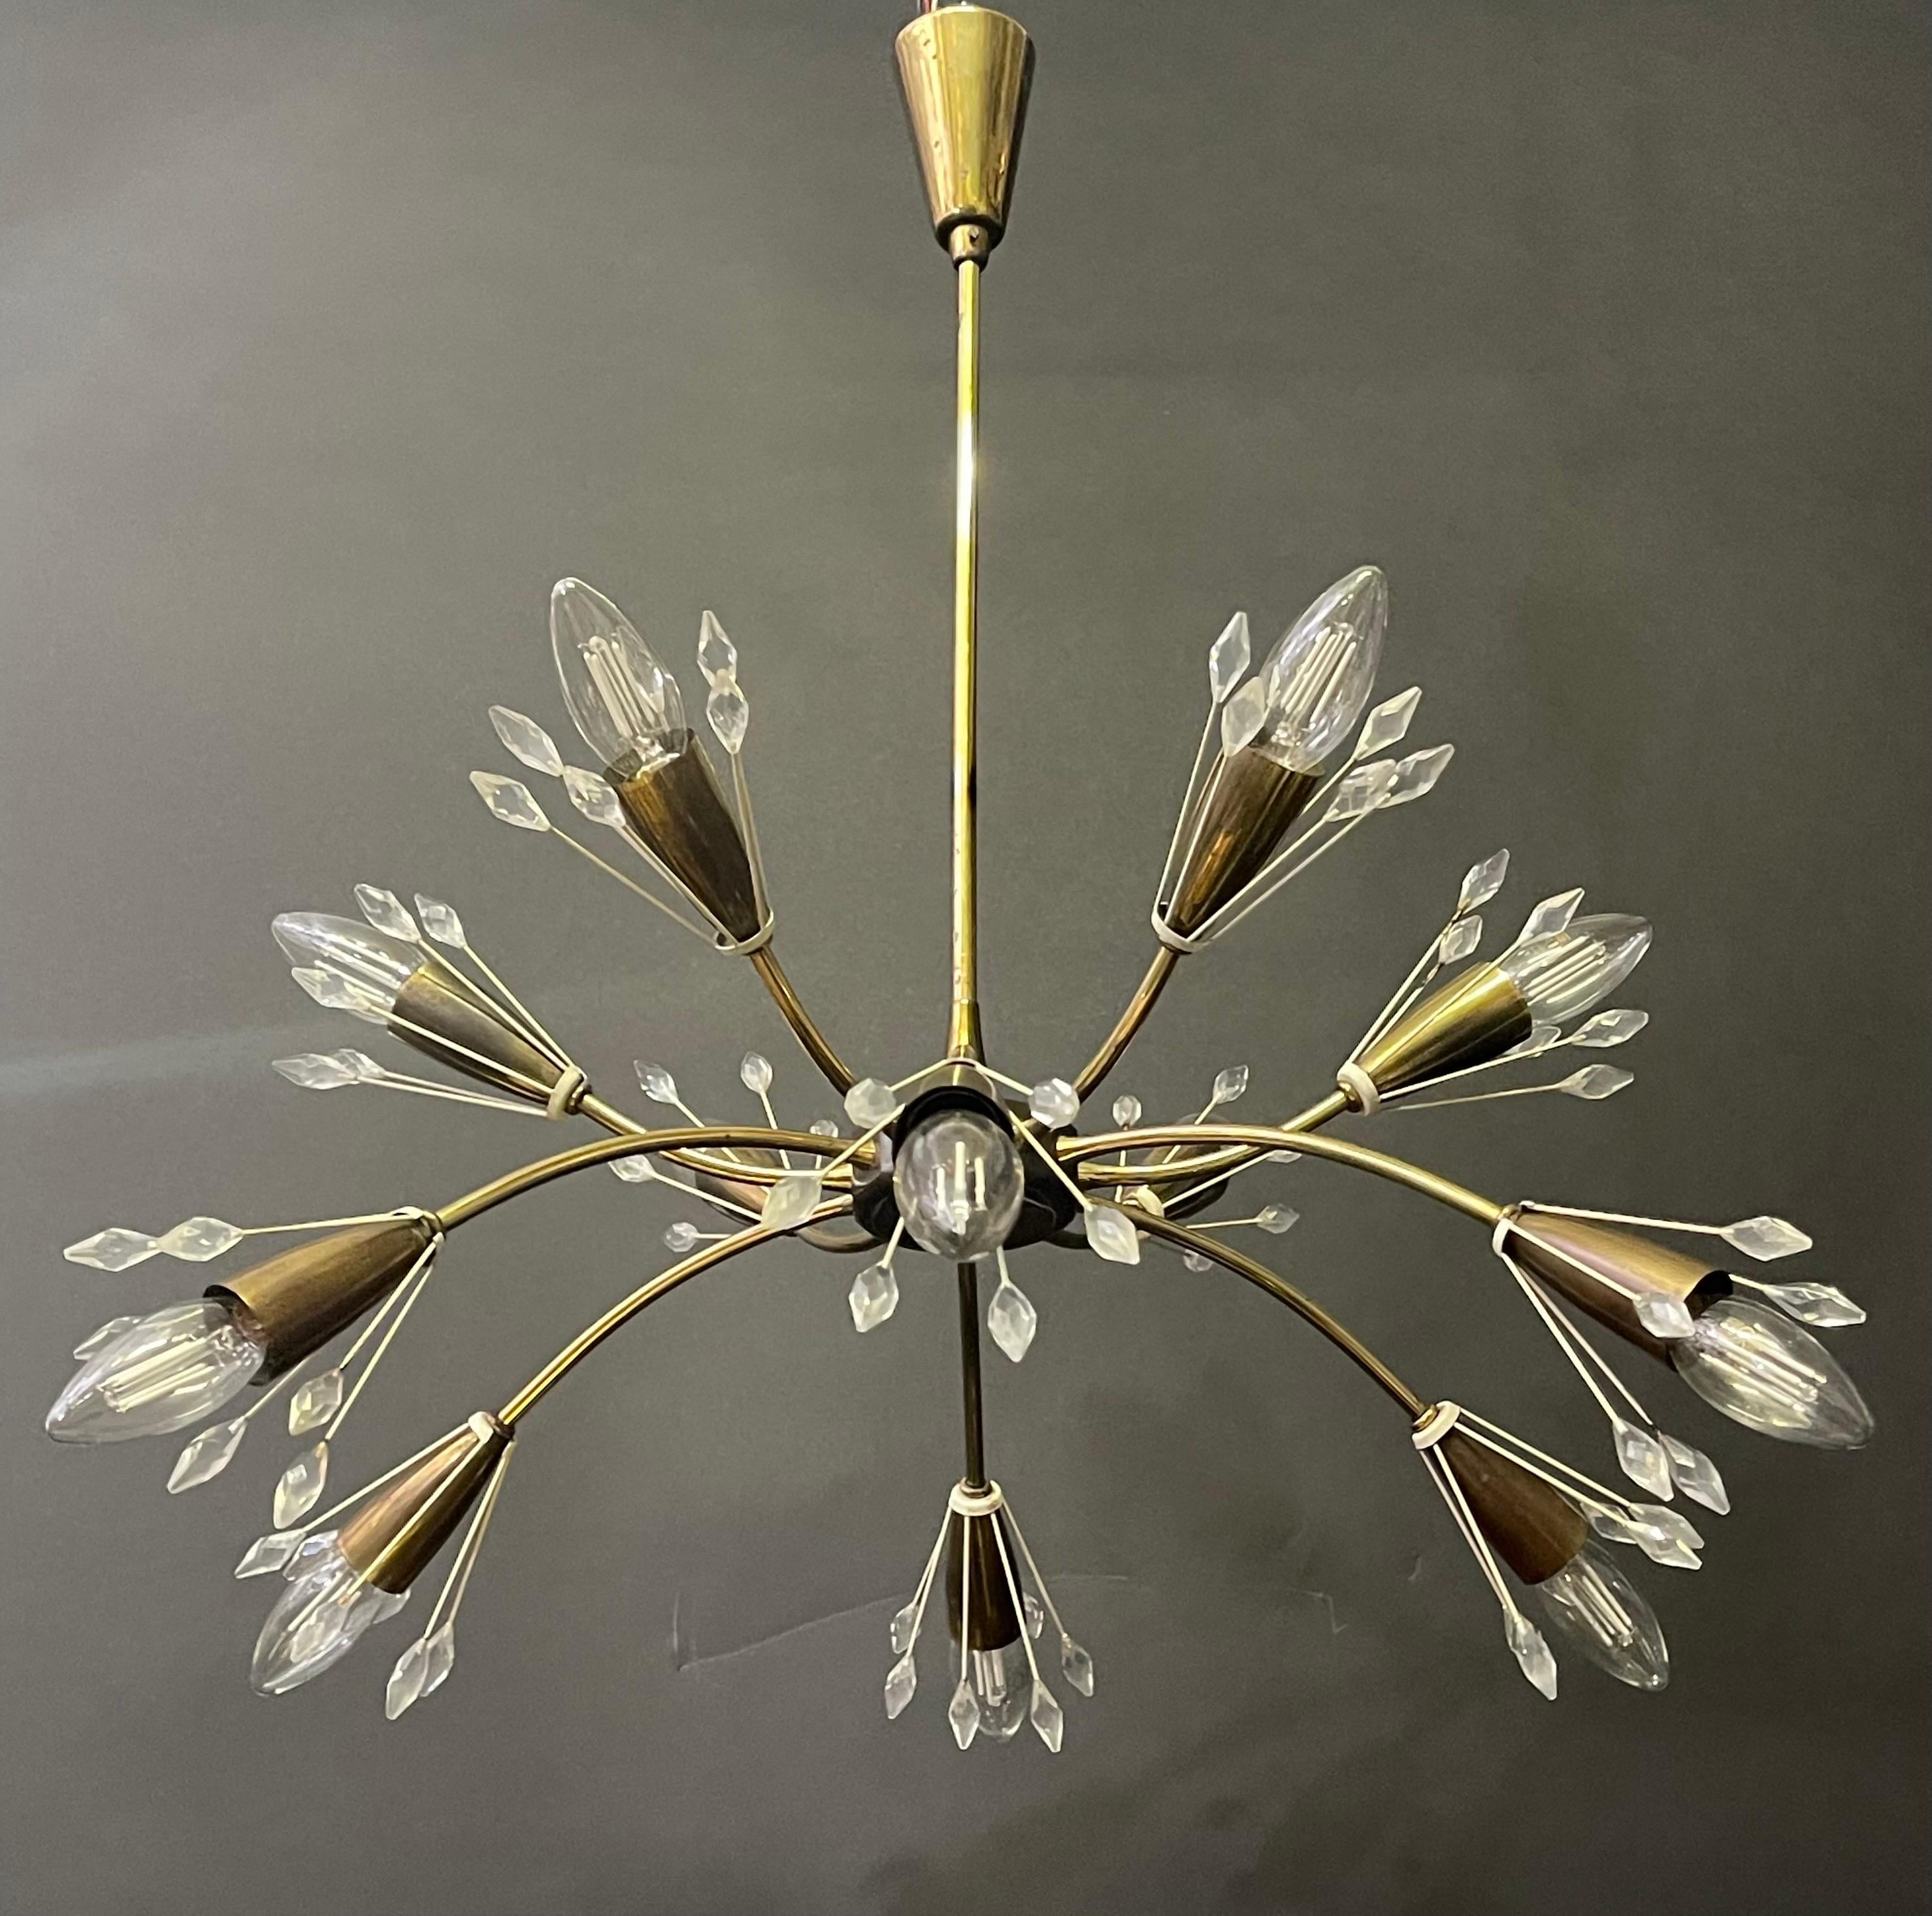 Rare mid - century polished and lacquered brass and metal 12 -arms chandelier by Rupert Nikoll, Austria, circa 1950s.

Socket: 12 x e14 for standard screw bulbs.

Pair of matching wall sconces are available*

